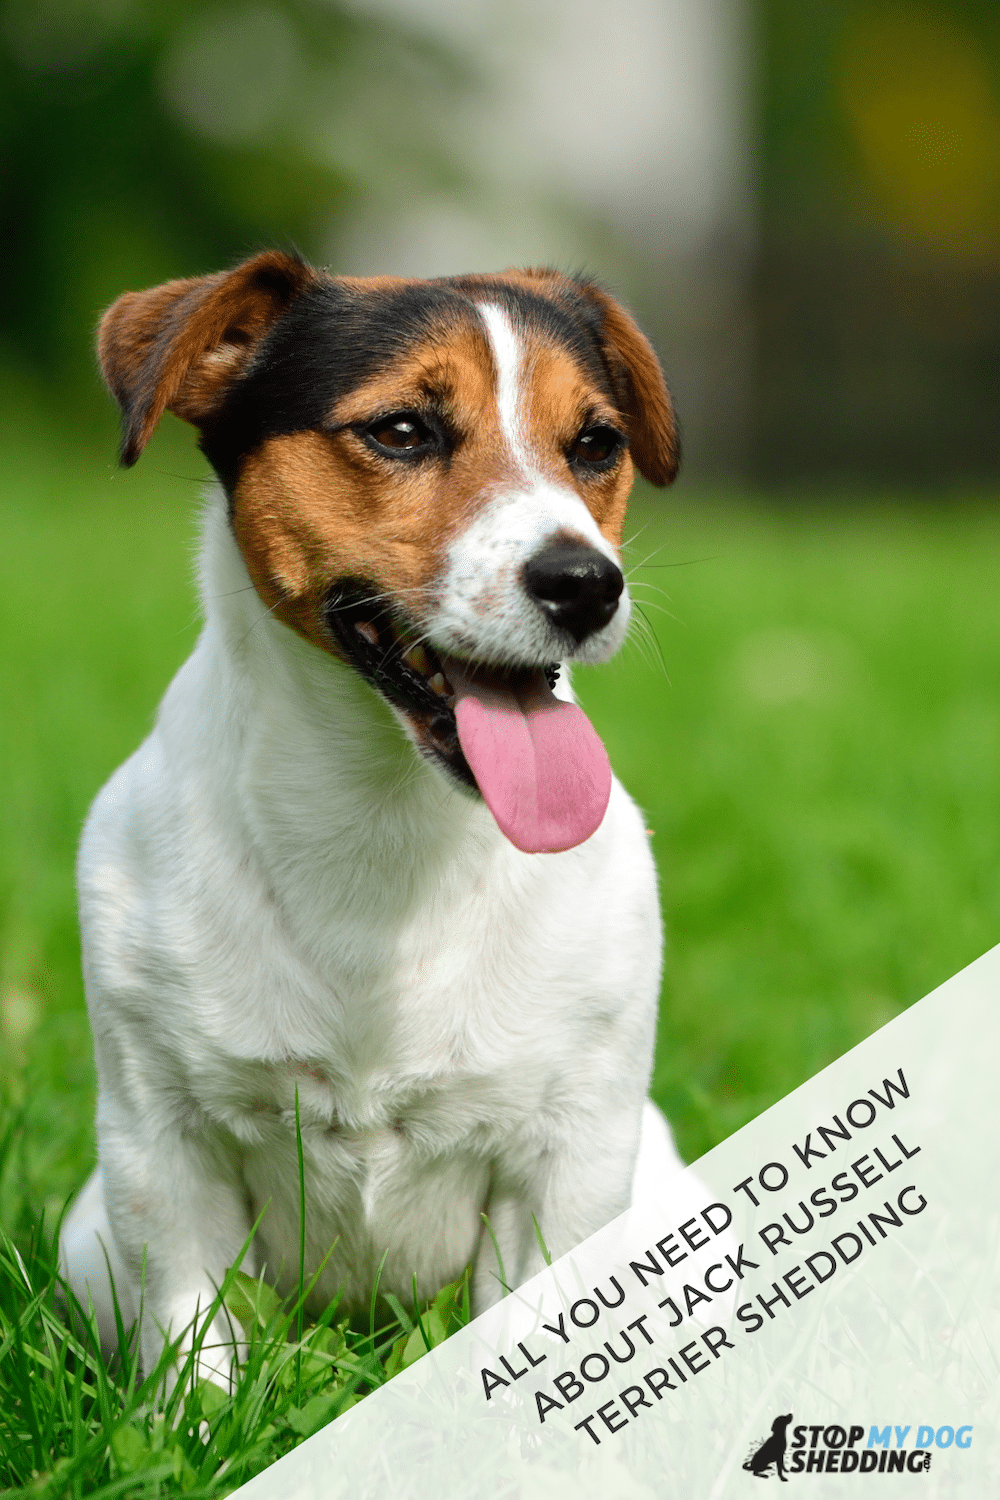 Do Jack Russell Terriers Shed?